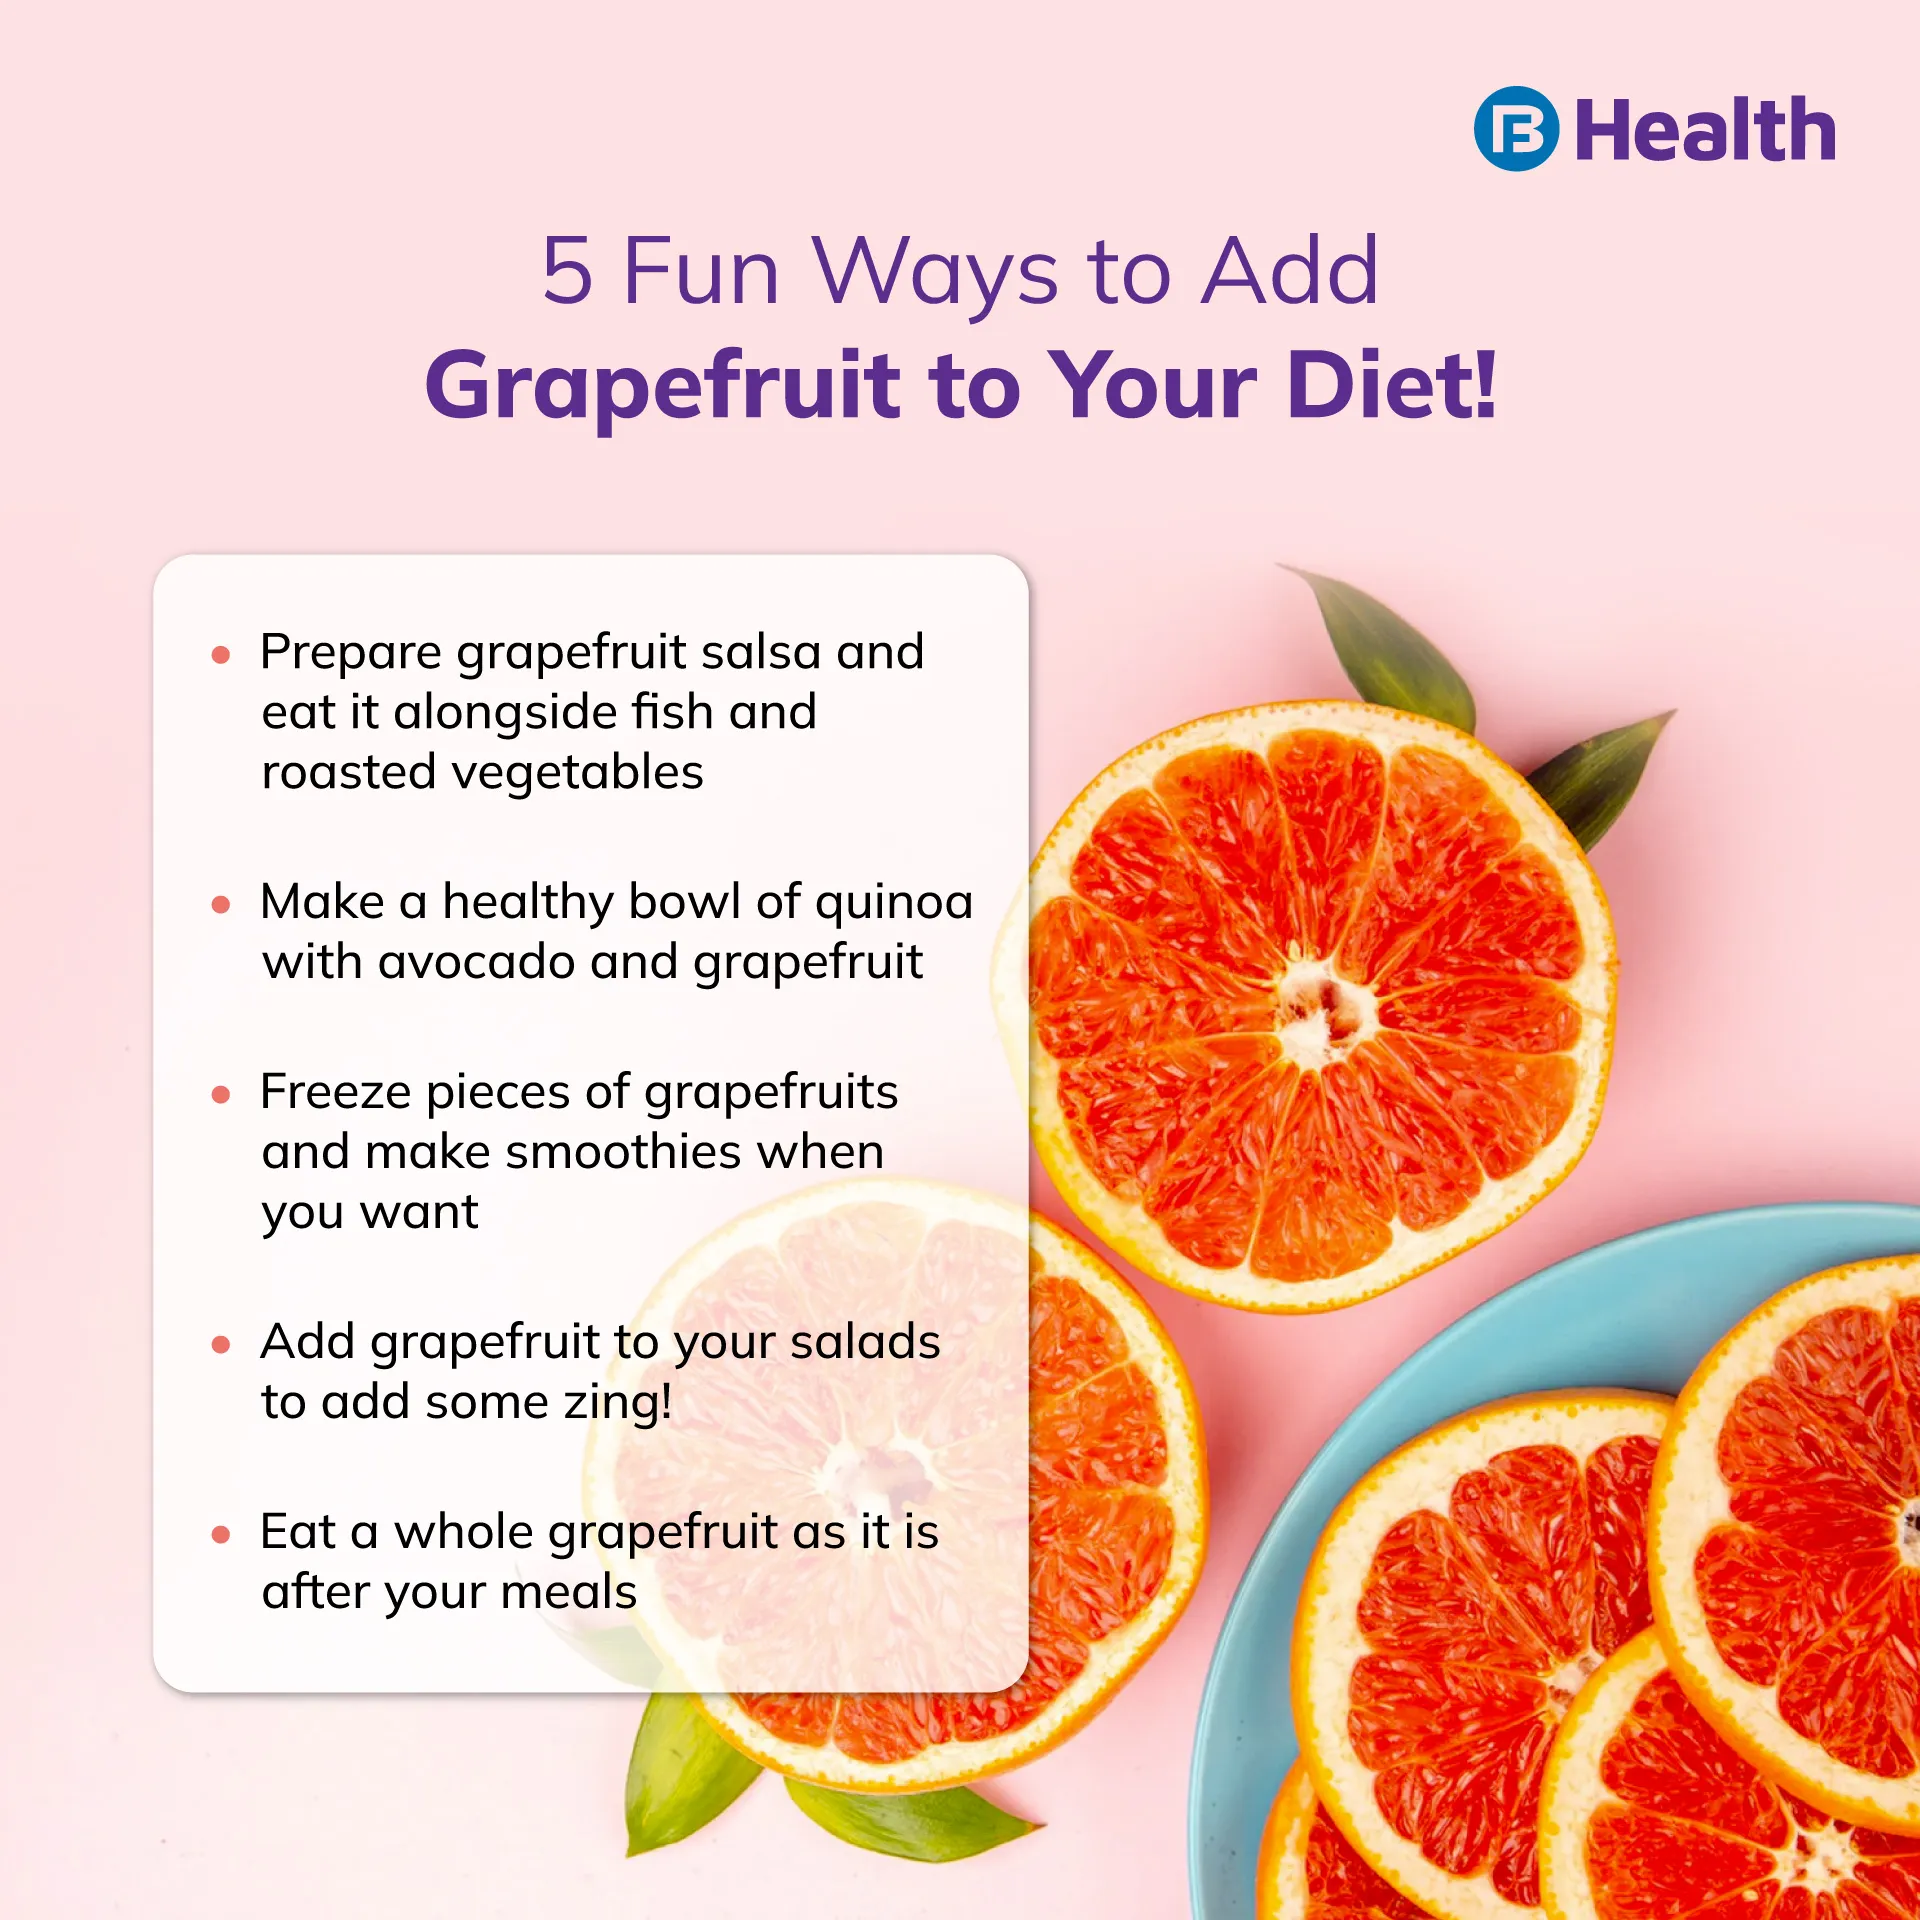 Grapefruit Guide: Nutrition, Benefits, Side Effects, and More